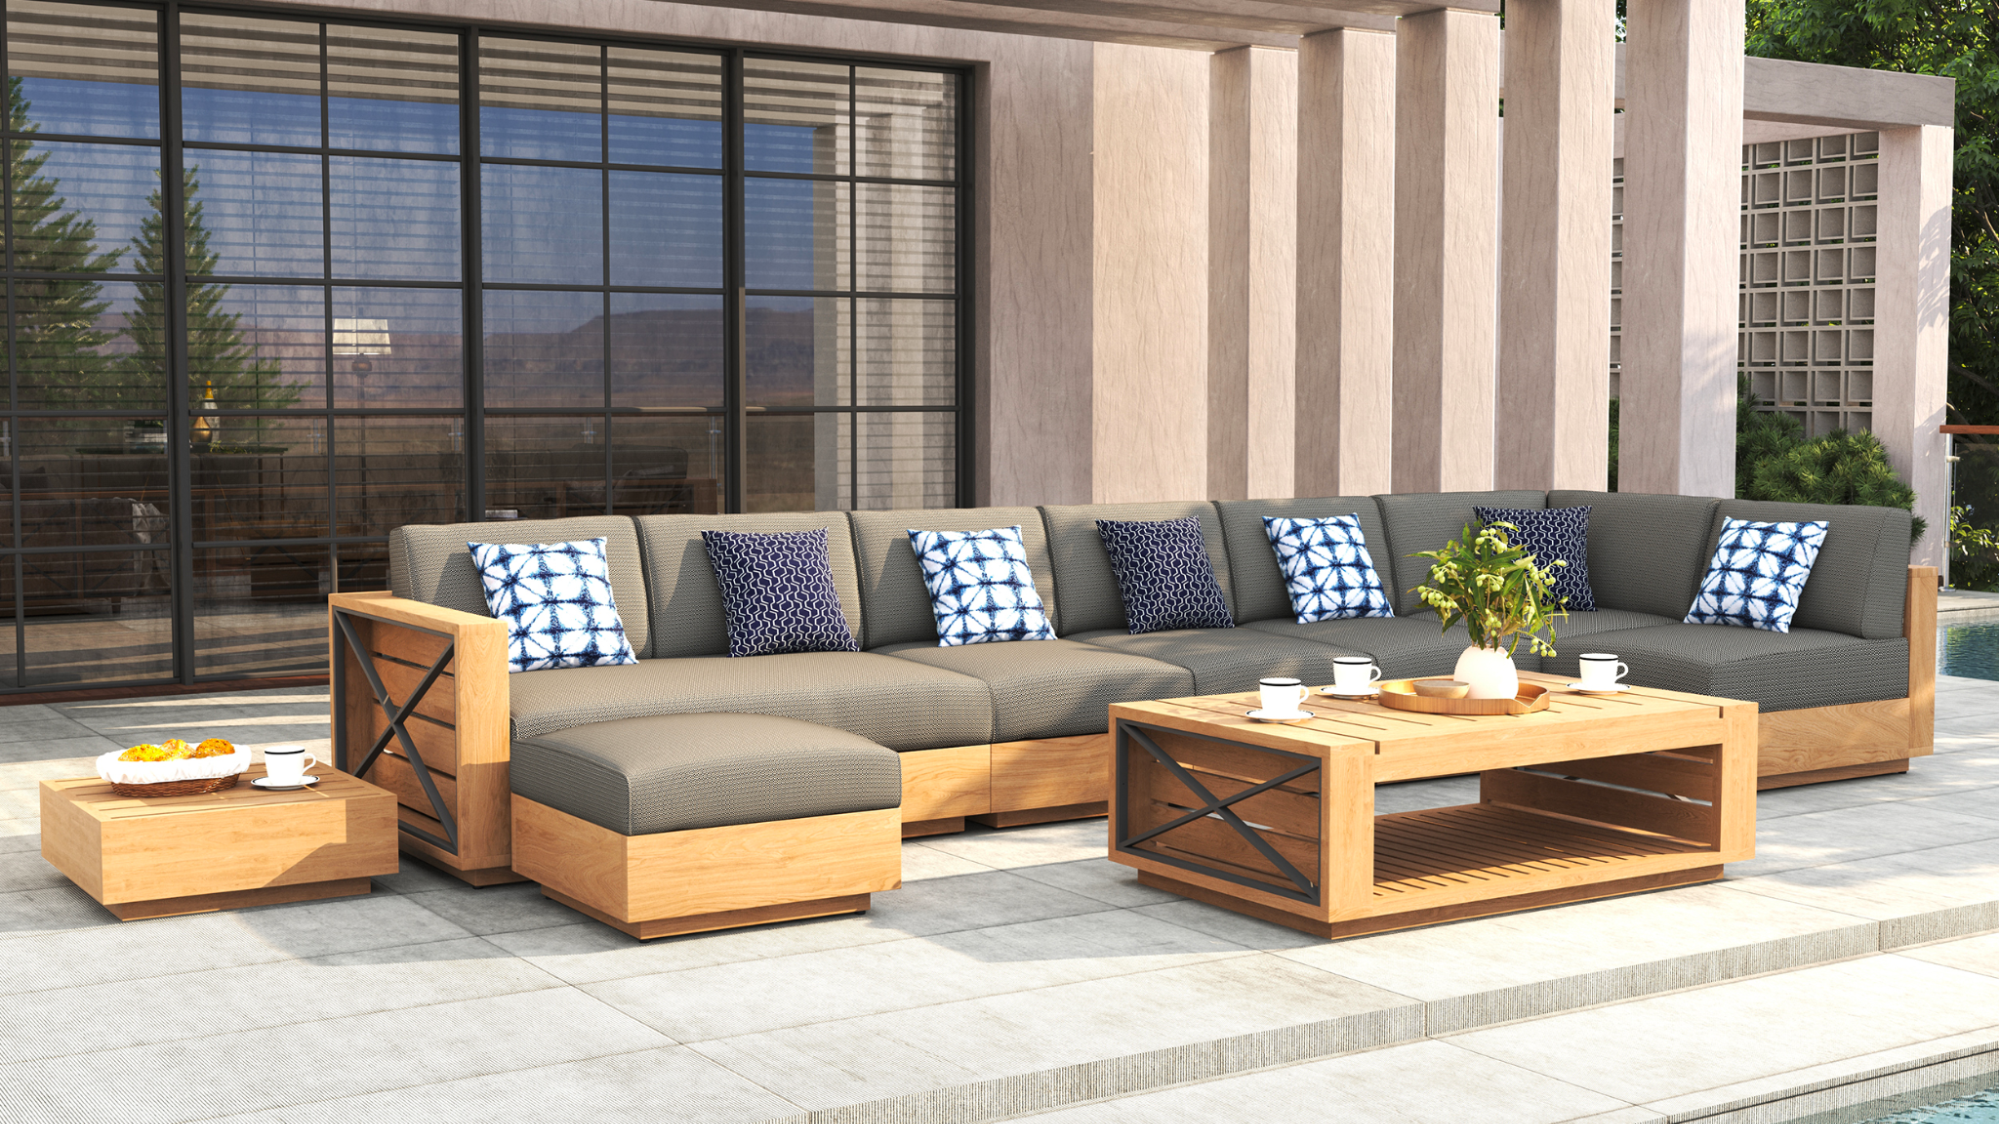 Trendy & Stylish Outdoor Furniture Ideas For Your Patio